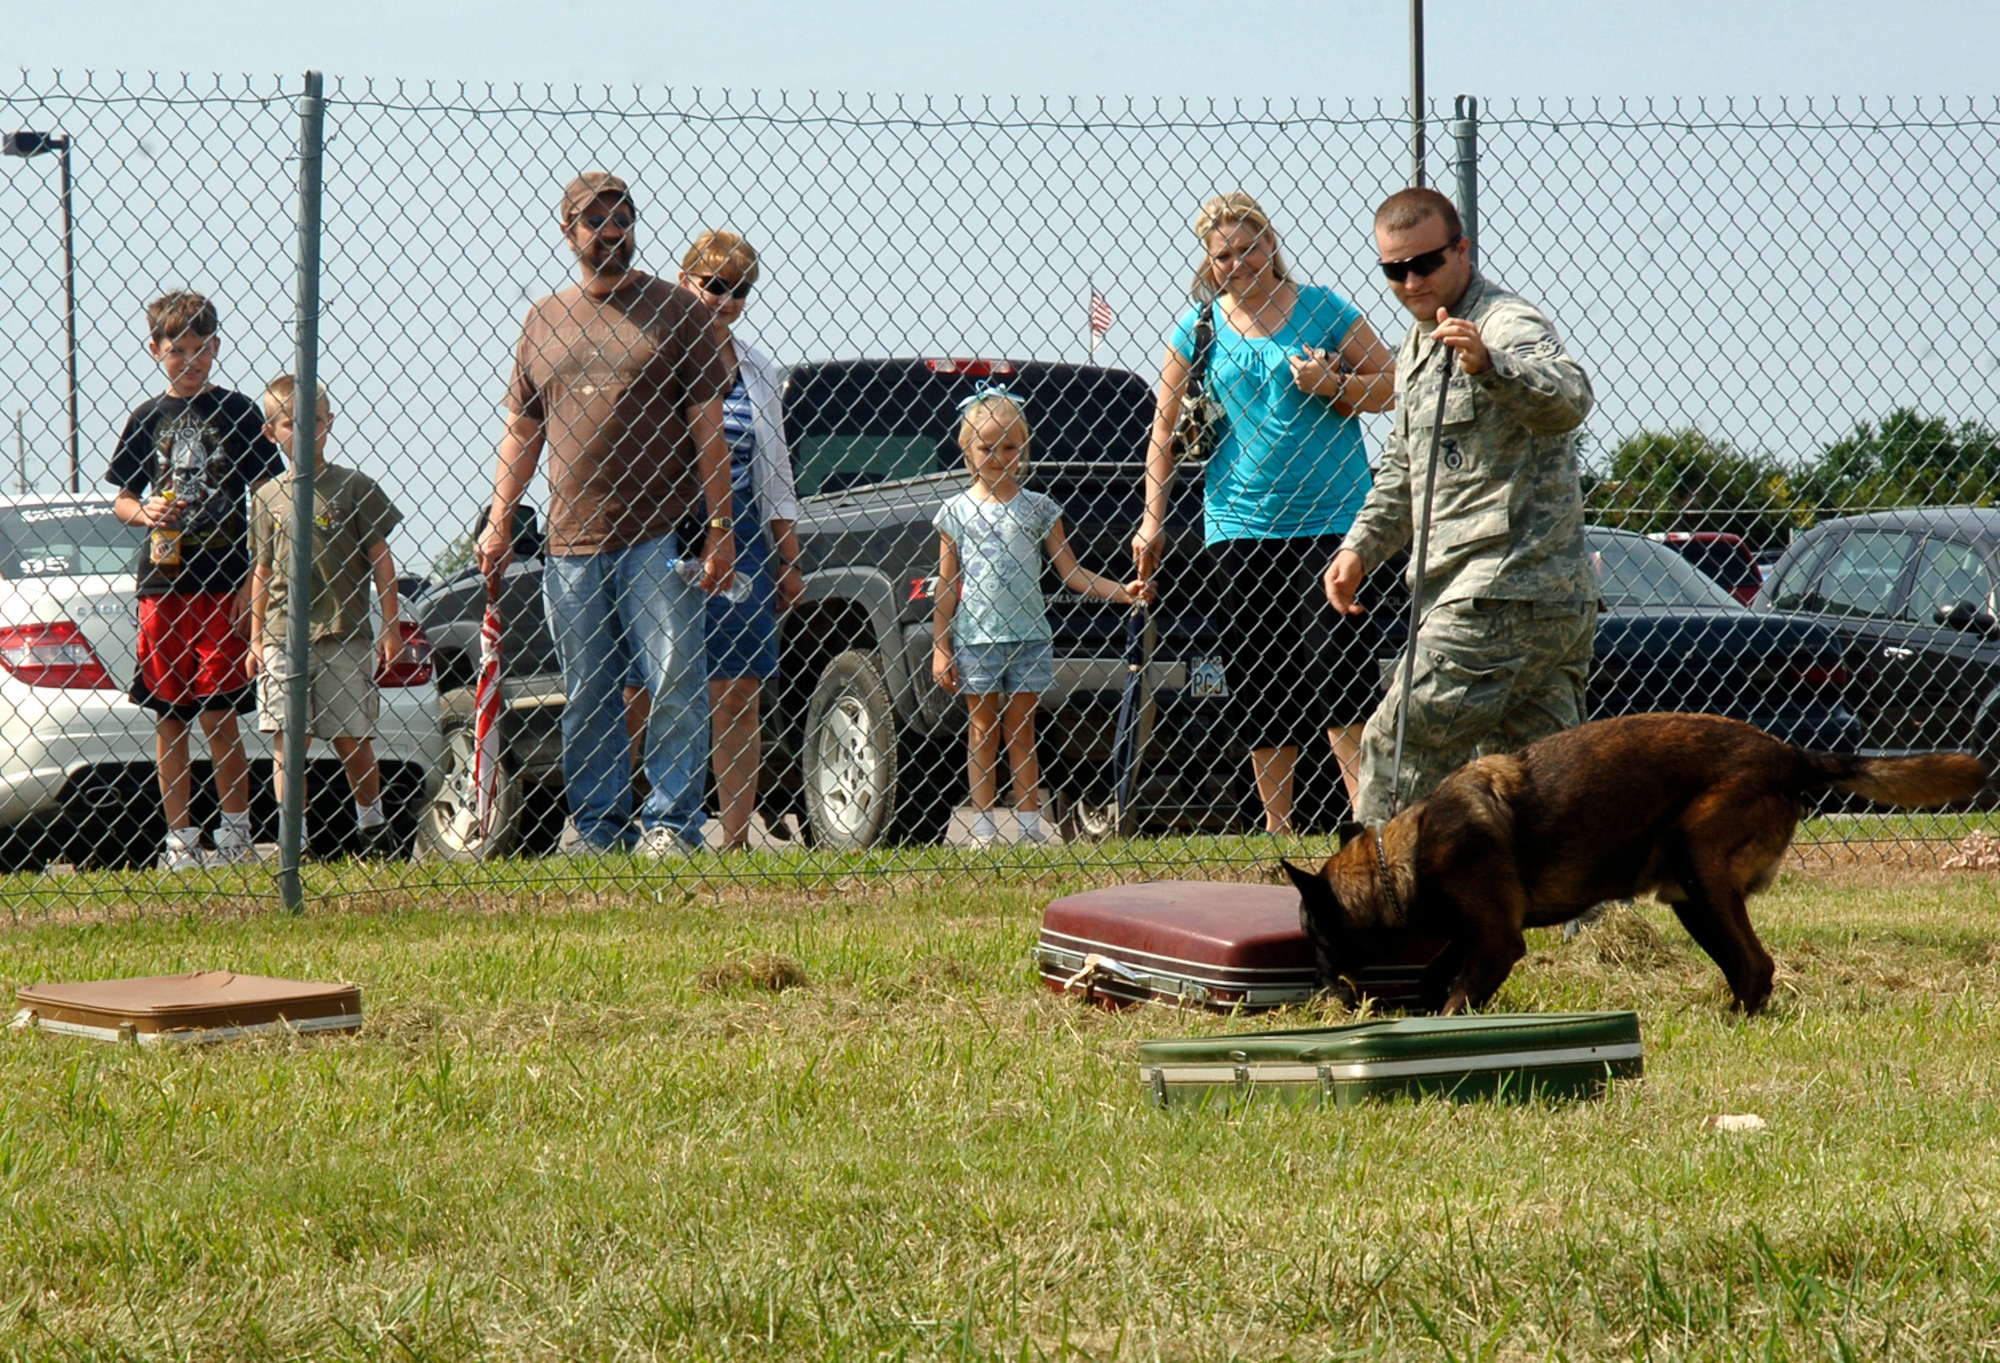 MCCONNELL AIR FORCE BASE, Kan. -- Staff Sgt. Matthew Mosher, 22nd Security Forces Squadron, and military working dog, Bram, demonstrate explosive detection for spectators at the Colonel James Jabara airport during the Wichita Flight Festival, Kan. Aug. 23. Bram, who recently returned from a deployment, can detect explosive material hidden within multiple suitcases. (Photo by Senior Airman Laura Suttles)